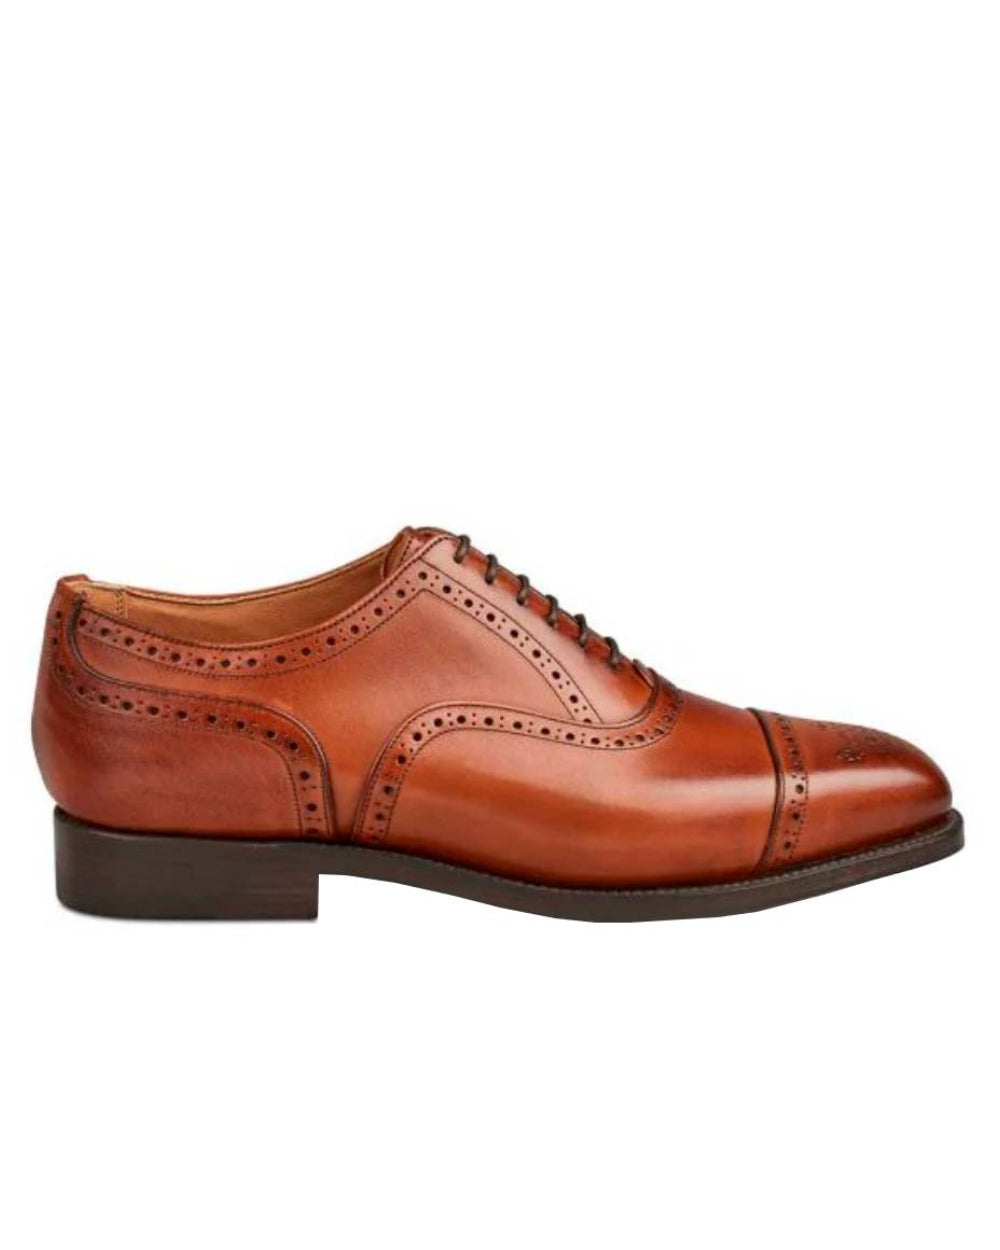 Beechnut Burnished Coloured Trickers Kensington Leather Sole Toecap Oxford City Shoe On A White Background 